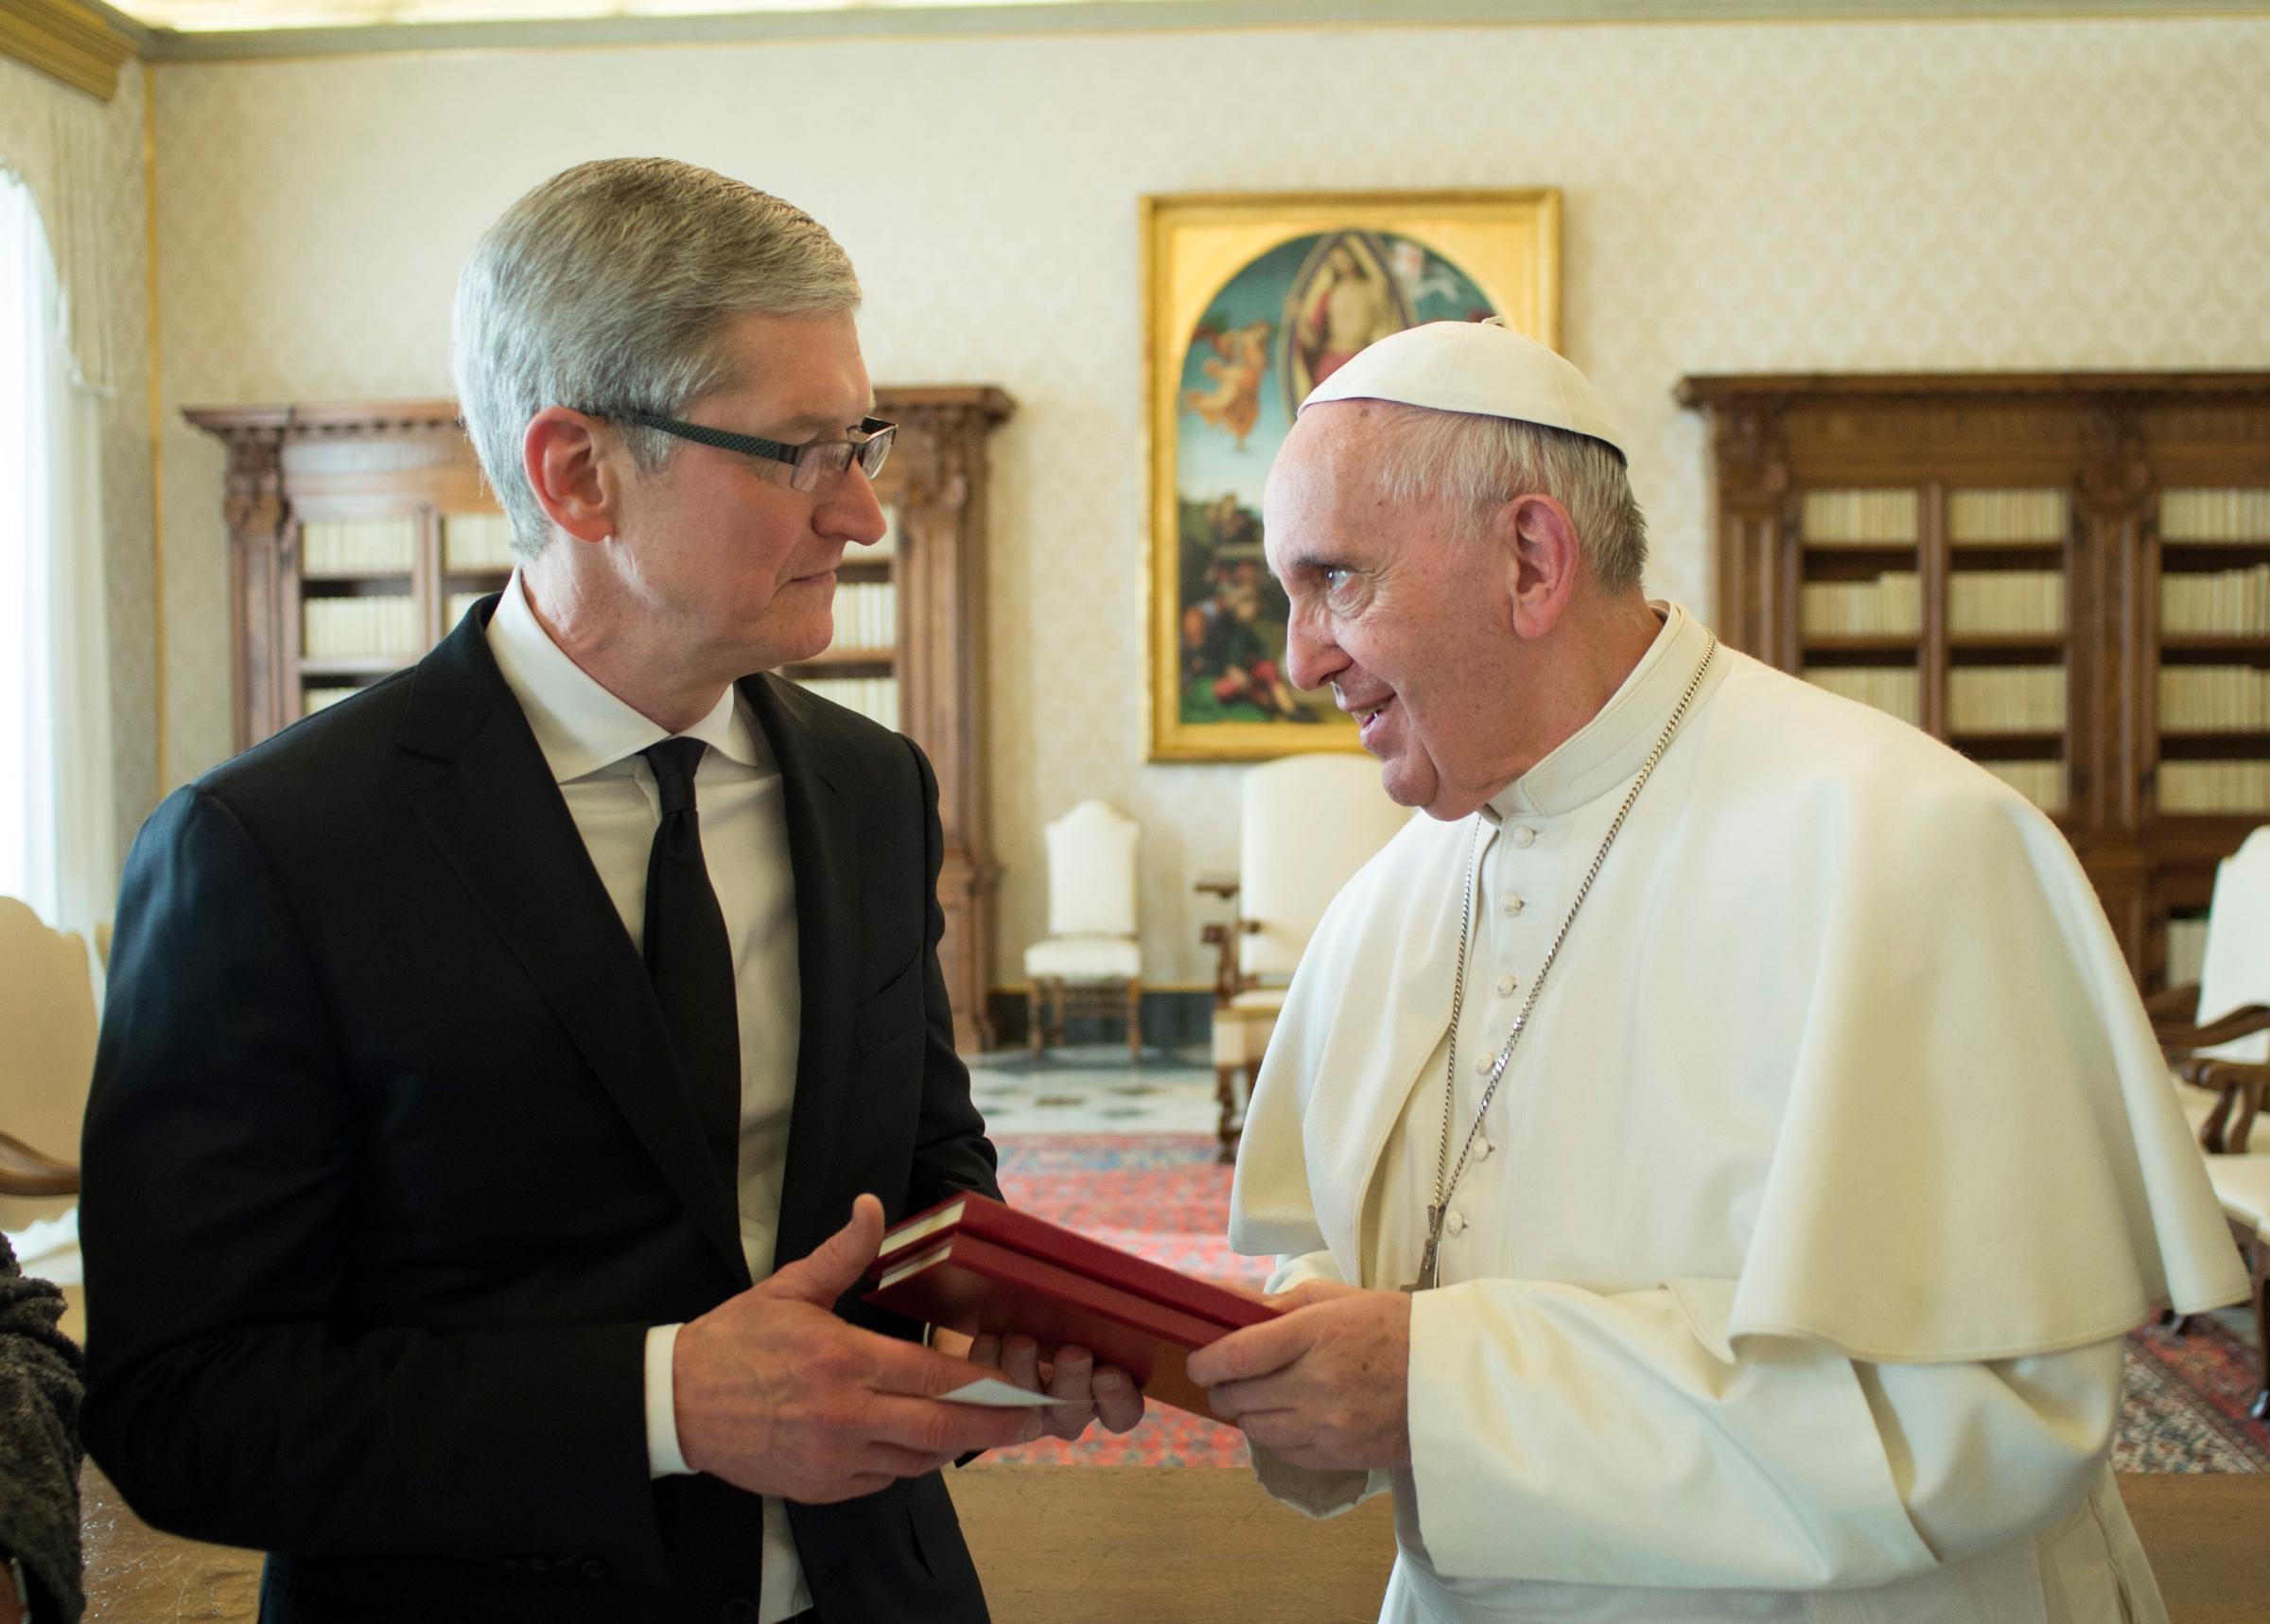 Pope Francis meets with Apple CEO Tim Cook at the Vatican on Jan. 22, 2016.